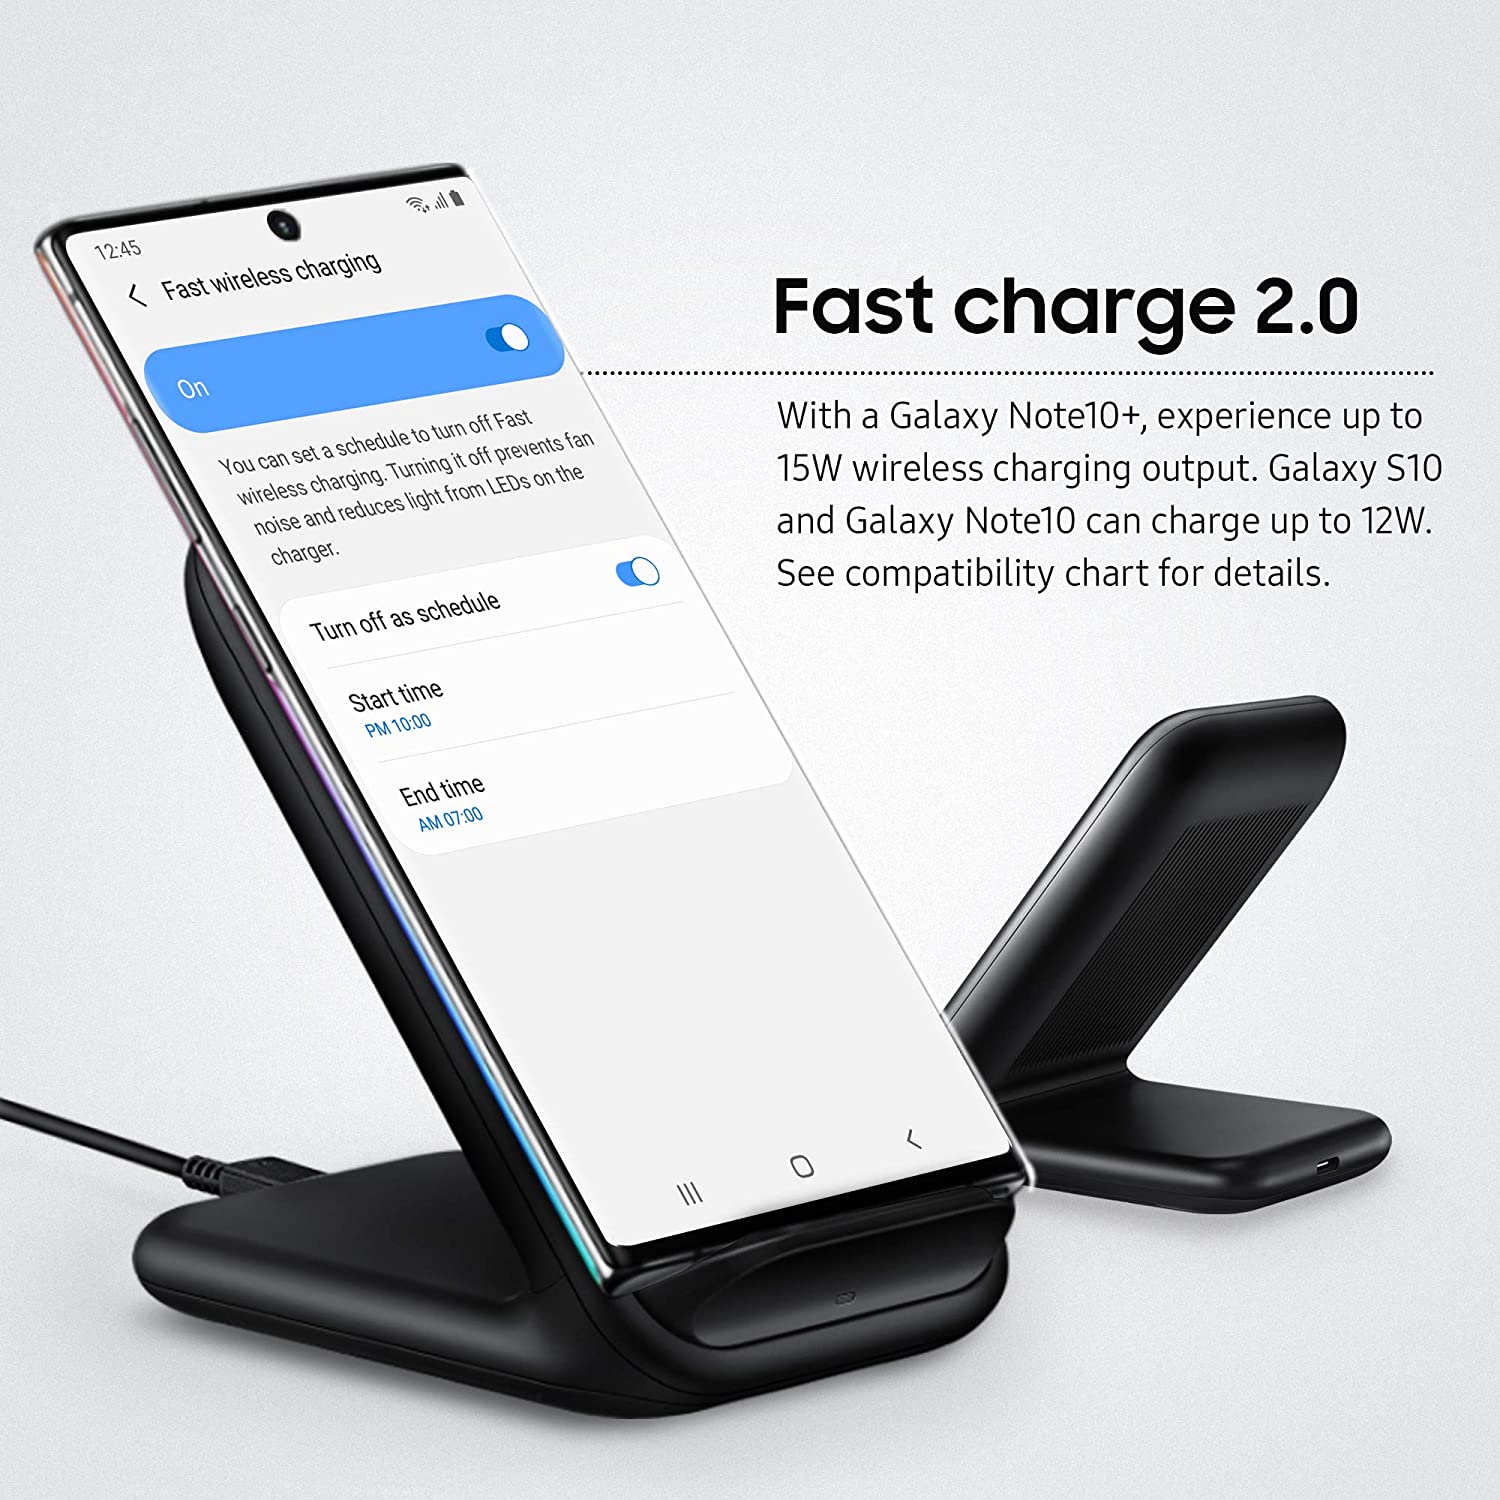 Samsung - EP-N5200TBEGUS 15W Qi Certified Fast Charge Wireless Charging Stand for iPhone/Android - Black